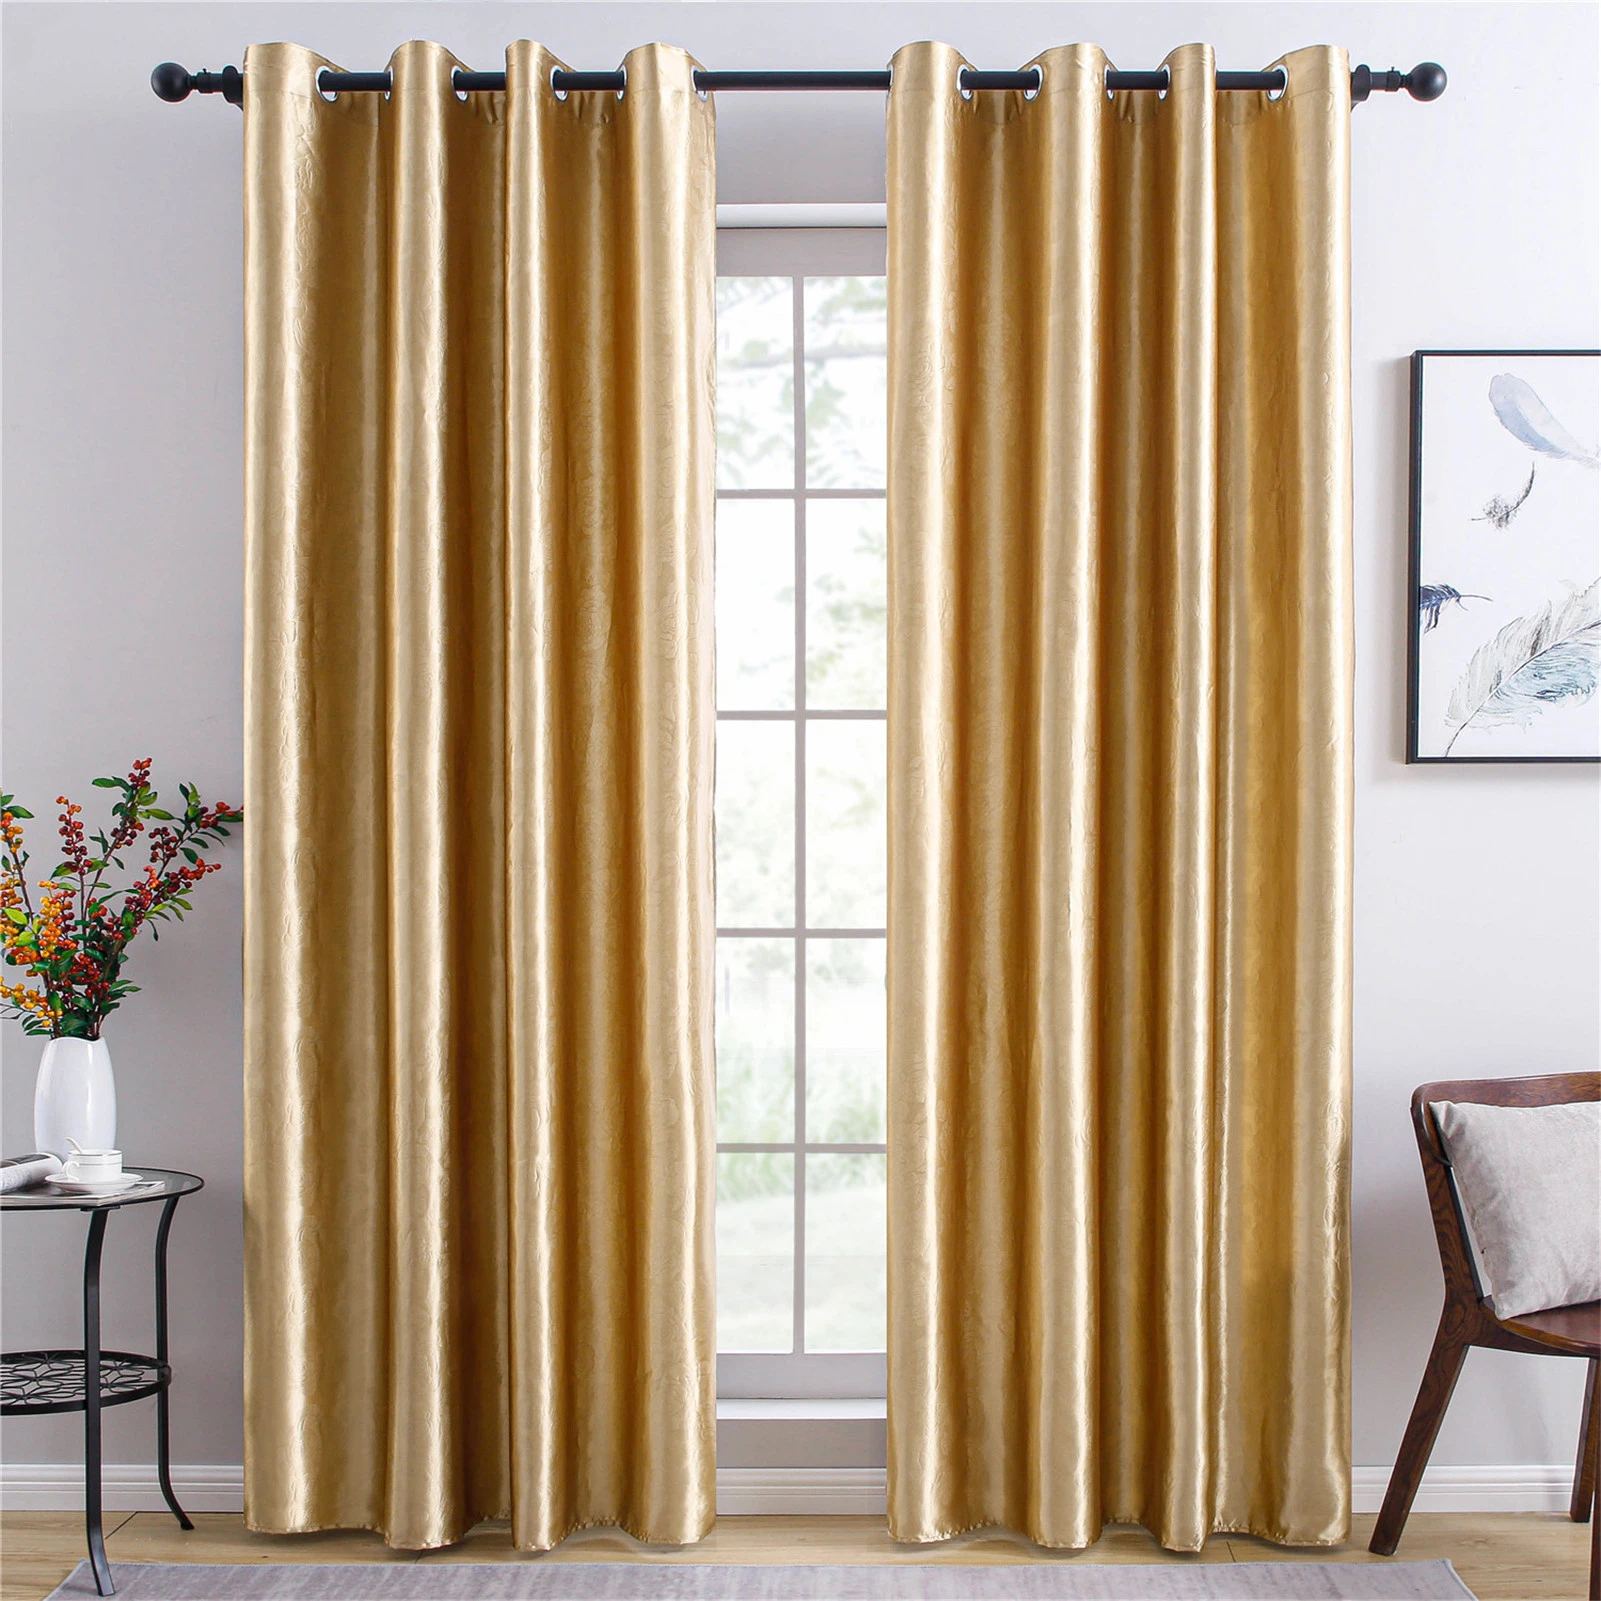 YokiSTG Solid Color Red Blackout Curtains for Living Room Bedroom Kitchen Window Treatment Blinds Finished Drapes Home Decor